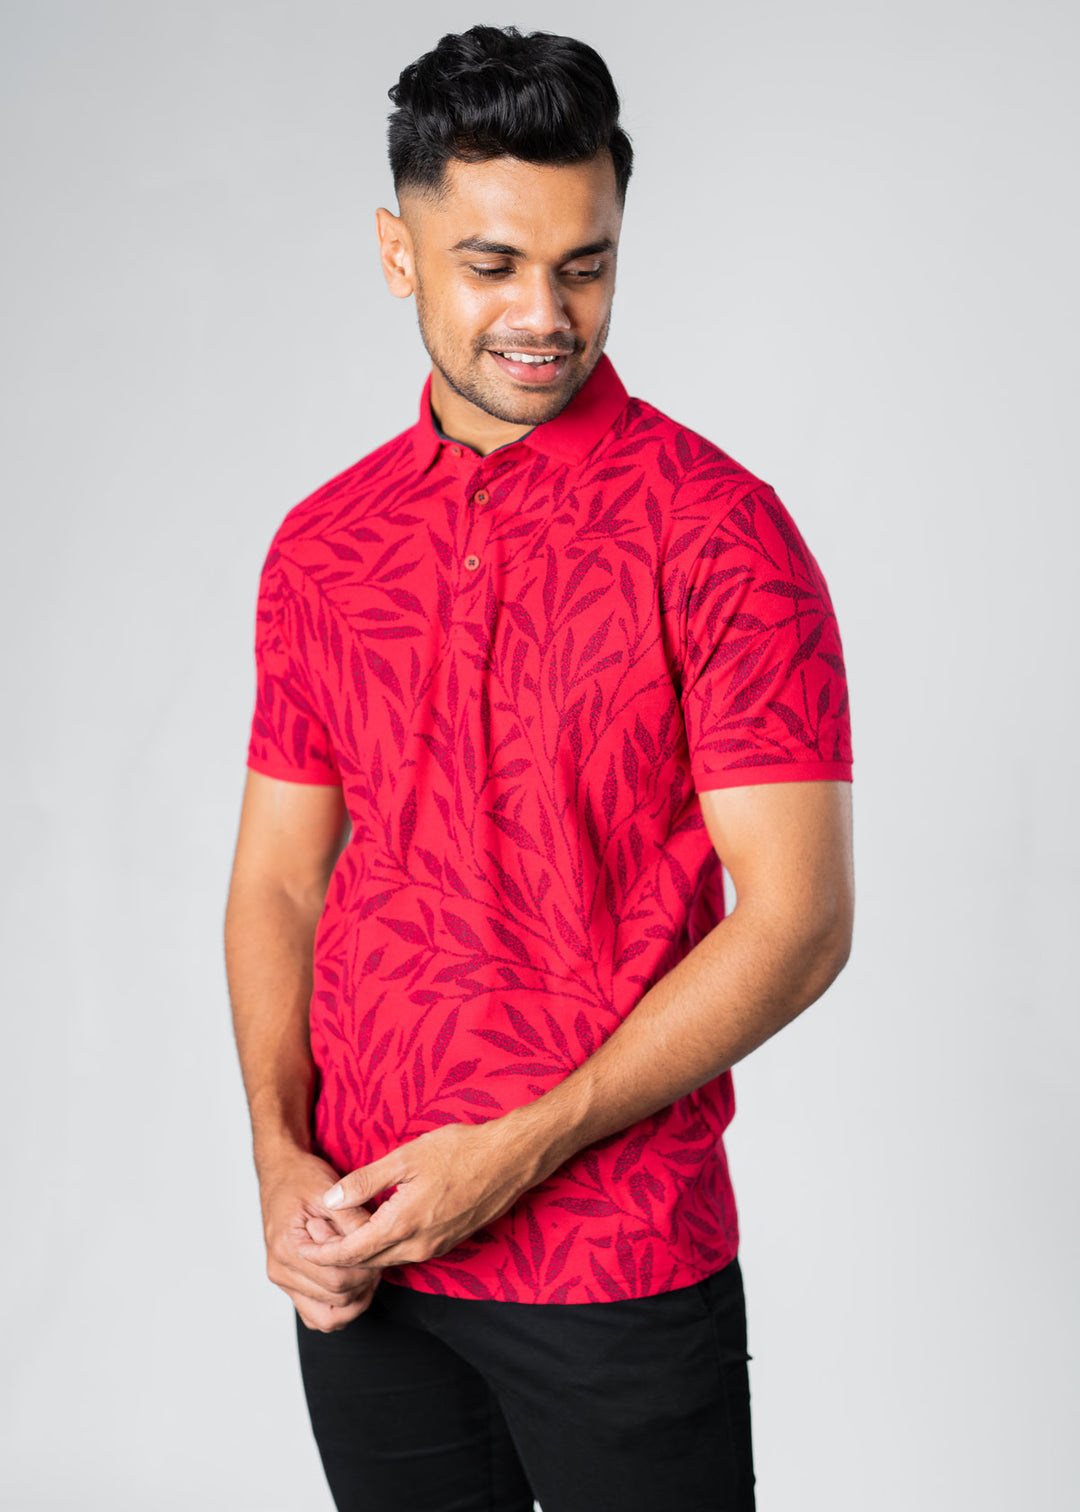 Elevated Summer Tonely Dark Premium Polo LCY